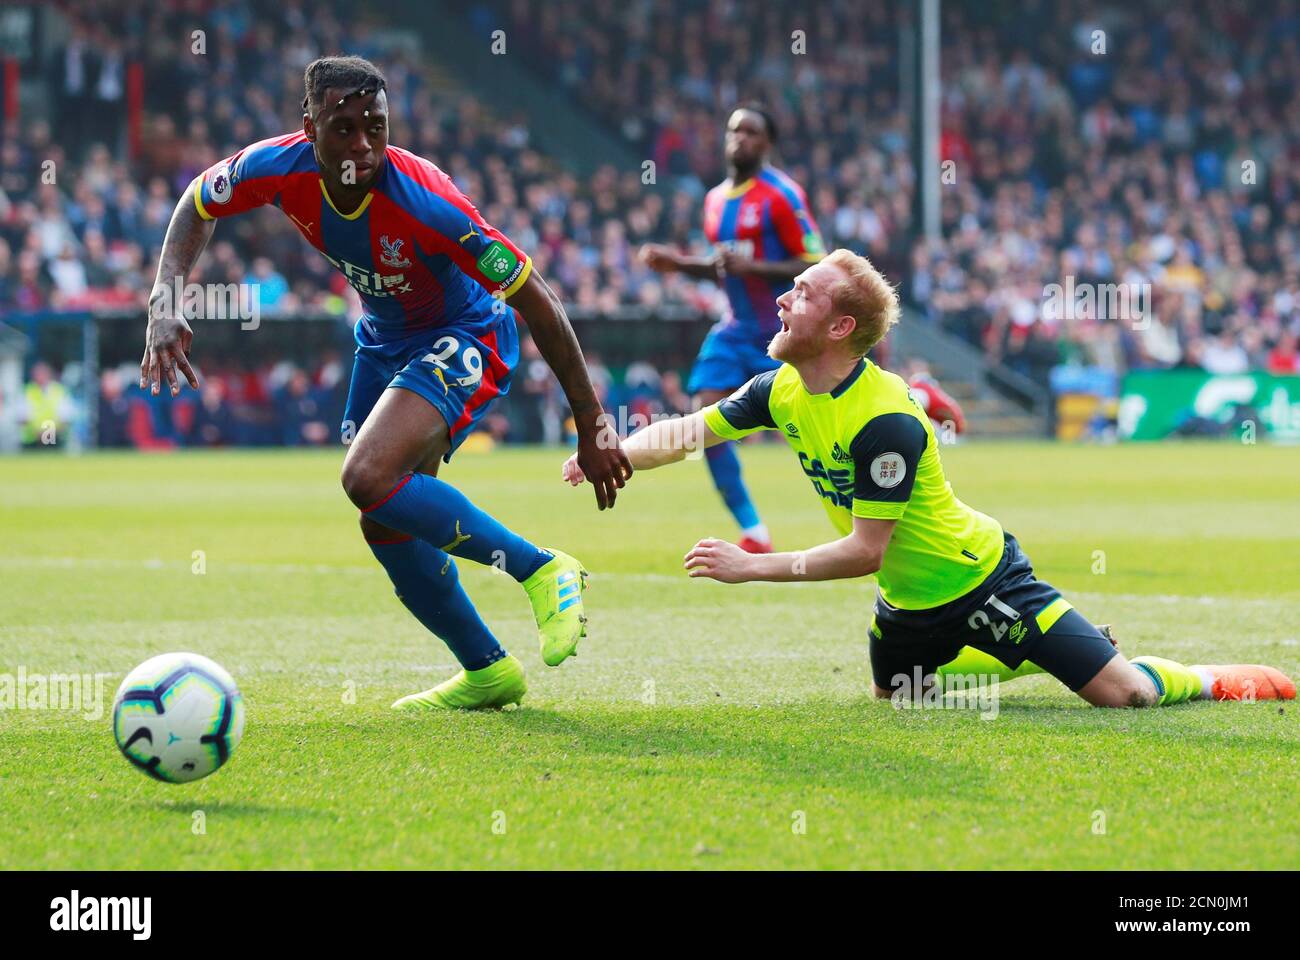 Soccer Football - Premier League - Crystal Palace v Huddersfield Town - Selhurst Park, London, Britain - March 30, 2019  Crystal Palace's Aaron Wan-Bissaka in action with Huddersfield Town's Alex Pritchard   Action Images via Reuters/Andrew Couldridge  EDITORIAL USE ONLY. No use with unauthorized audio, video, data, fixture lists, club/league logos or 'live' services. Online in-match use limited to 75 images, no video emulation. No use in betting, games or single club/league/player publications.  Please contact your account representative for further details. Stock Photo